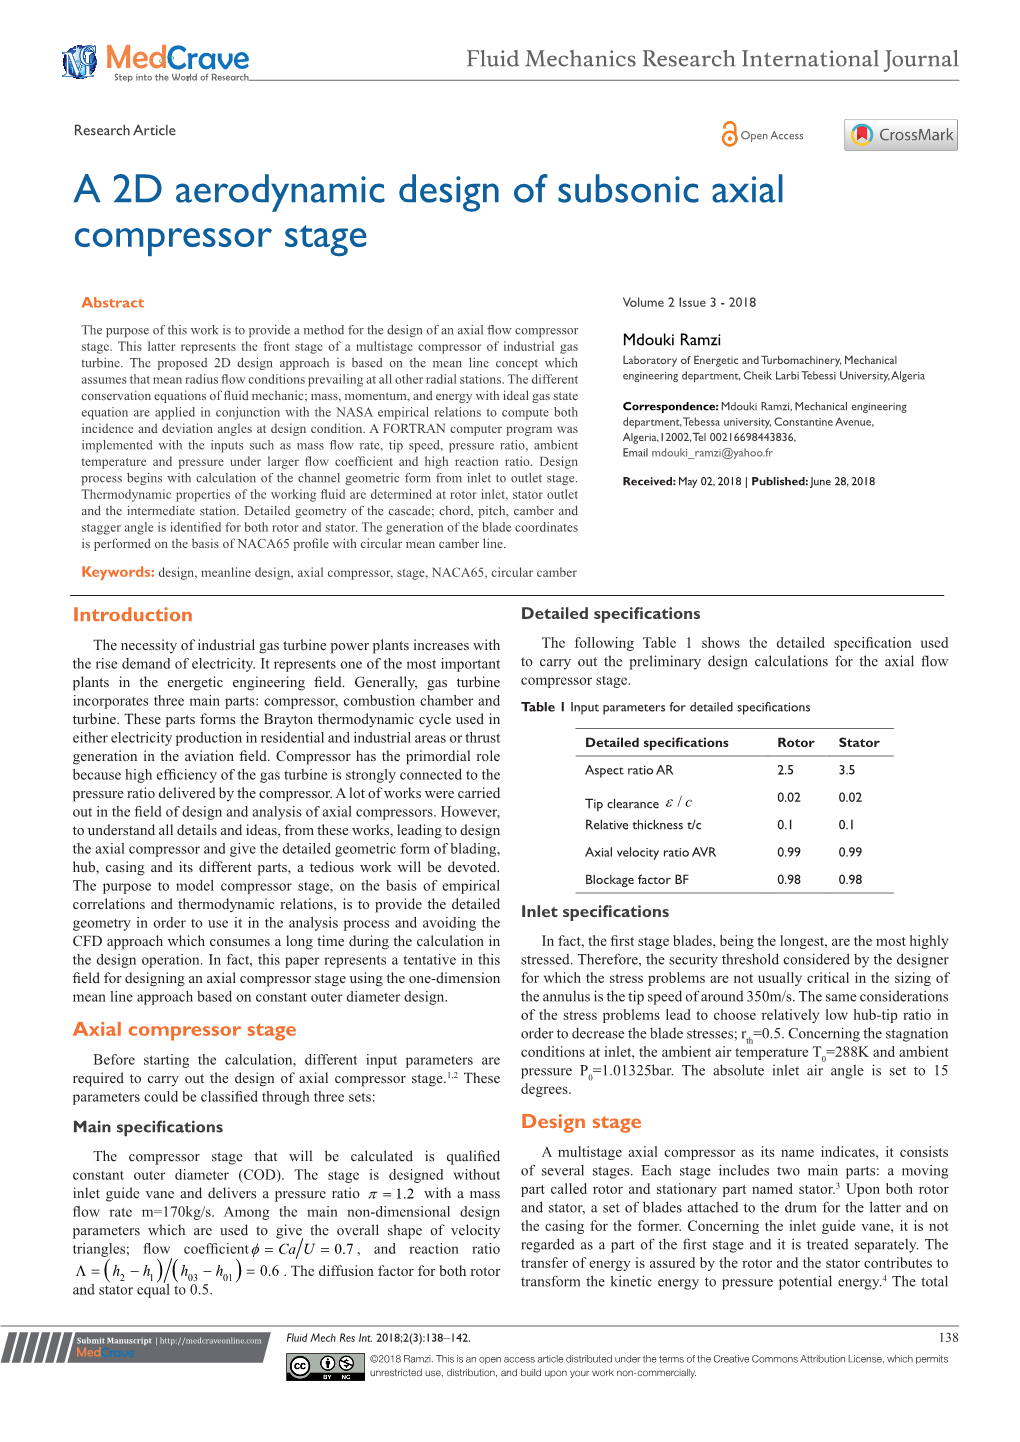 A 2D Aerodynamic Design of Subsonic Axial Compressor Stage